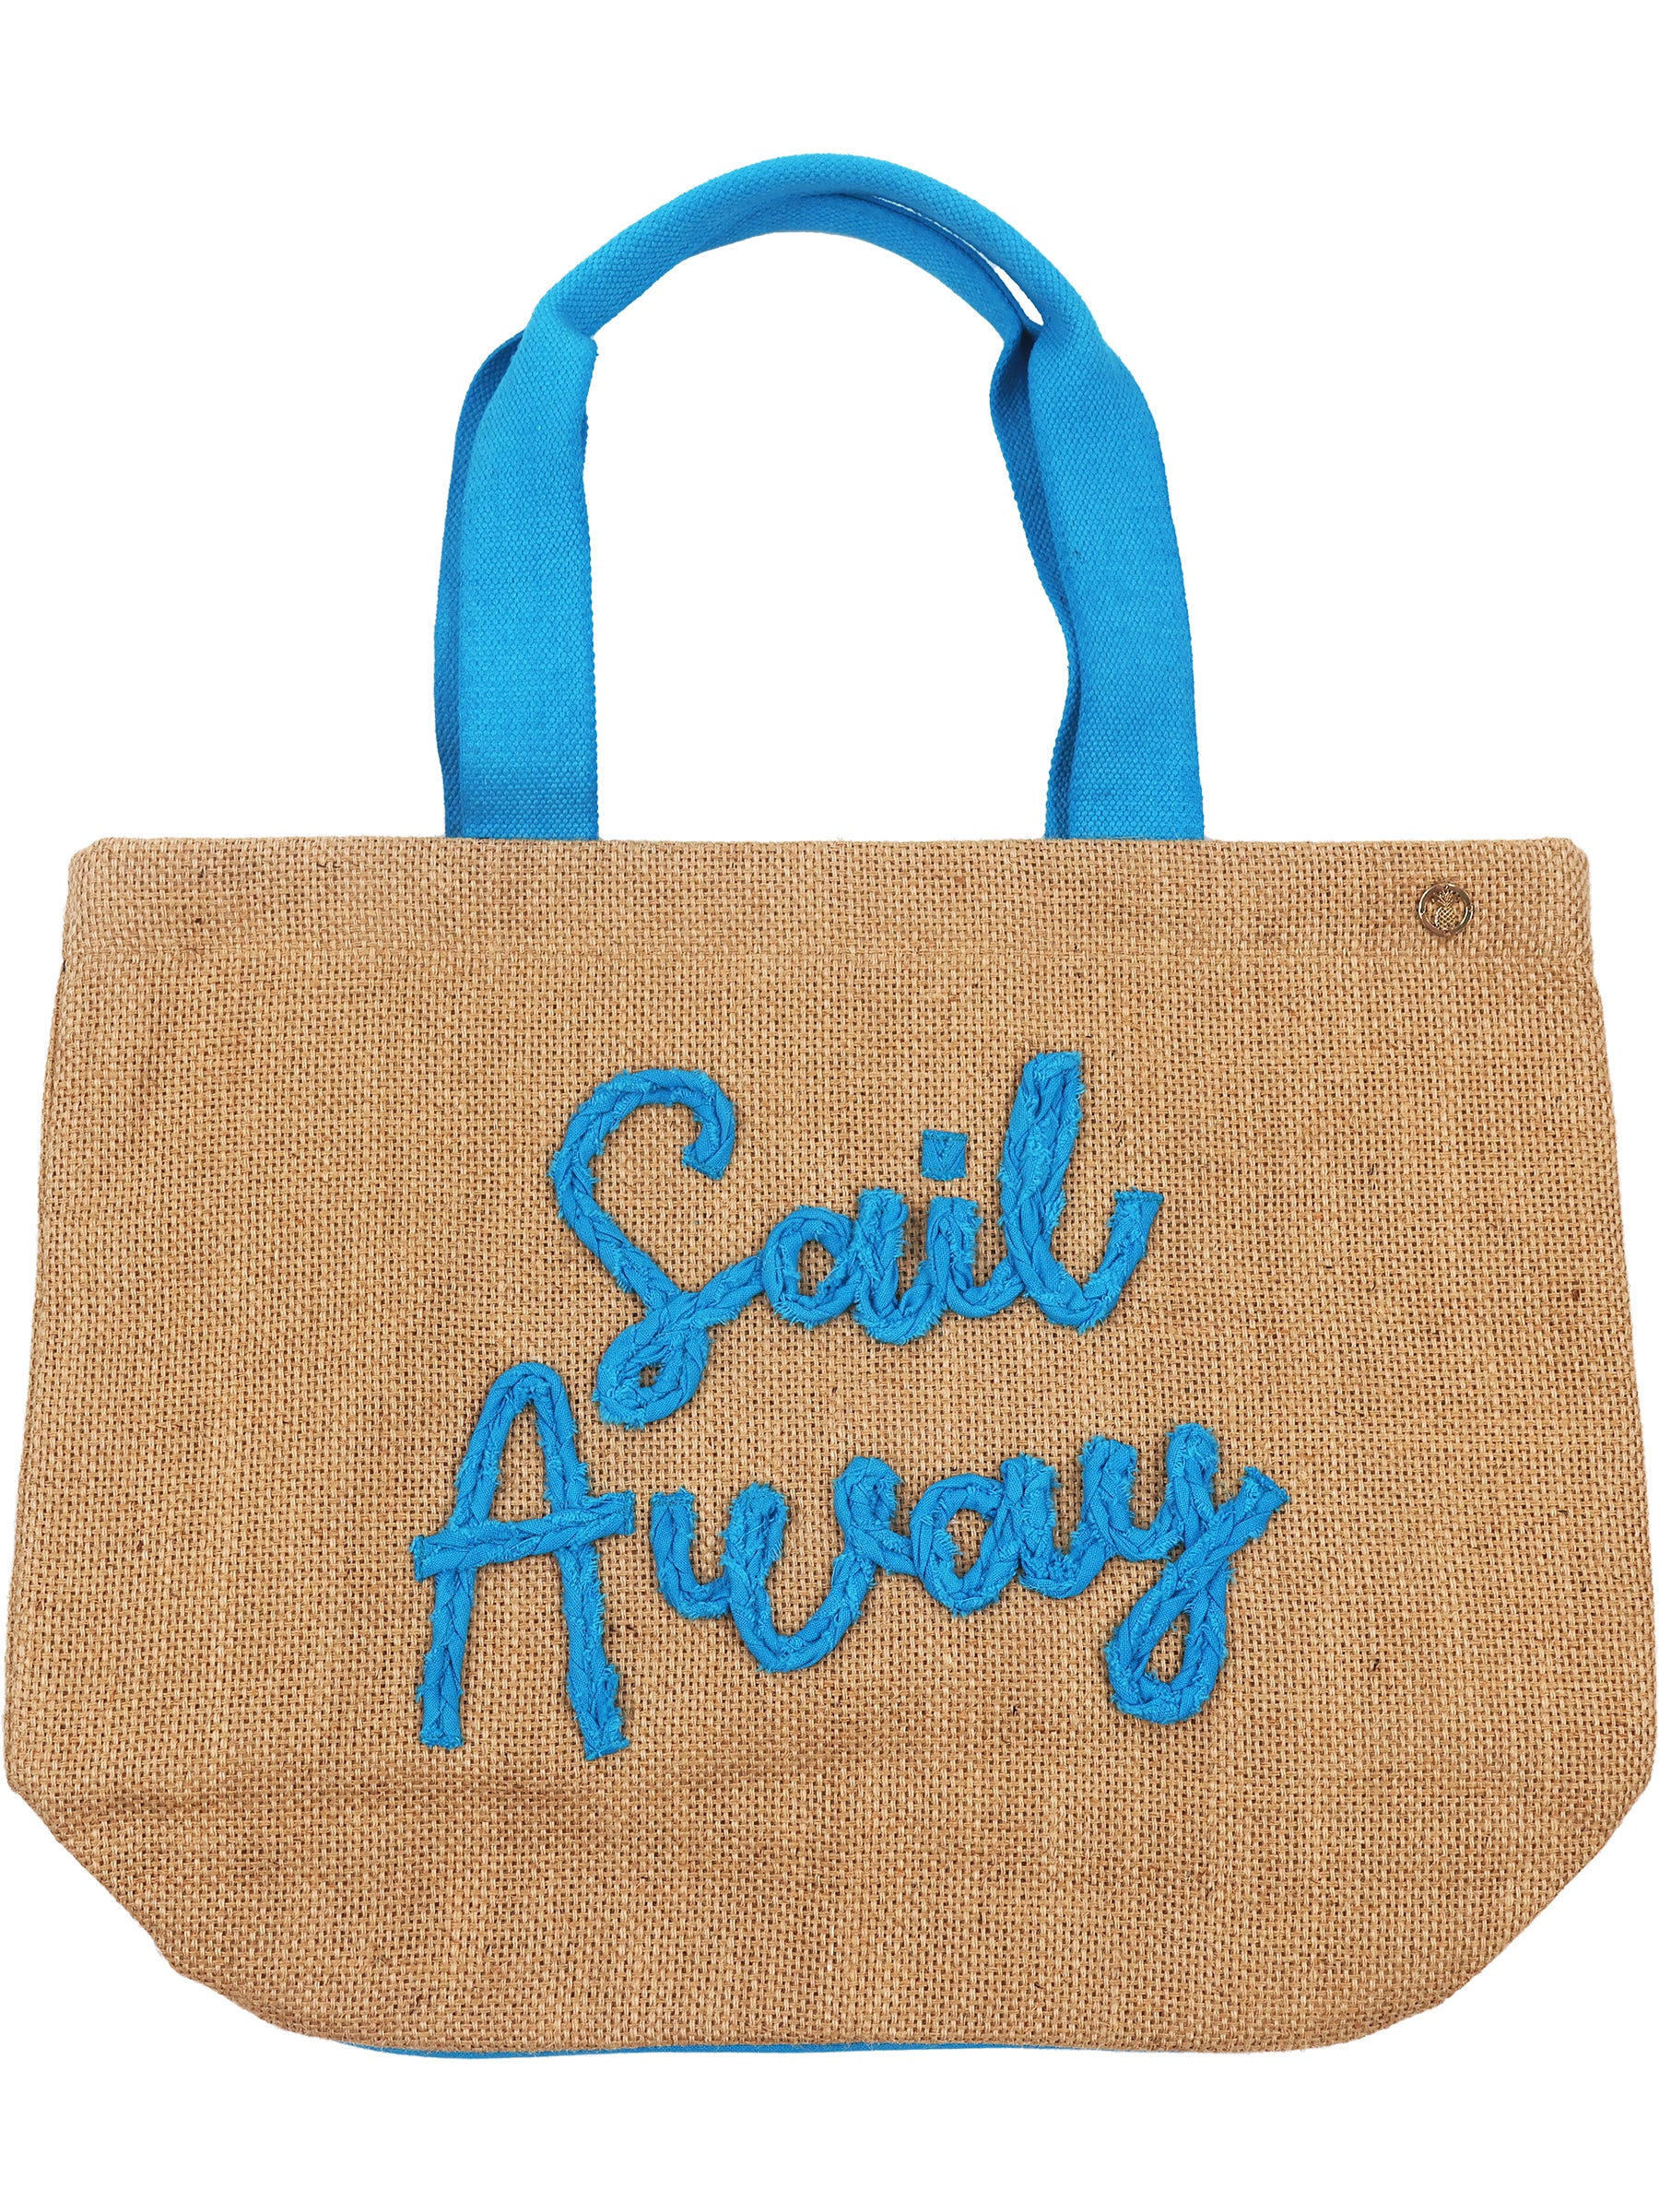 Embroidered Totes by Simply Southern